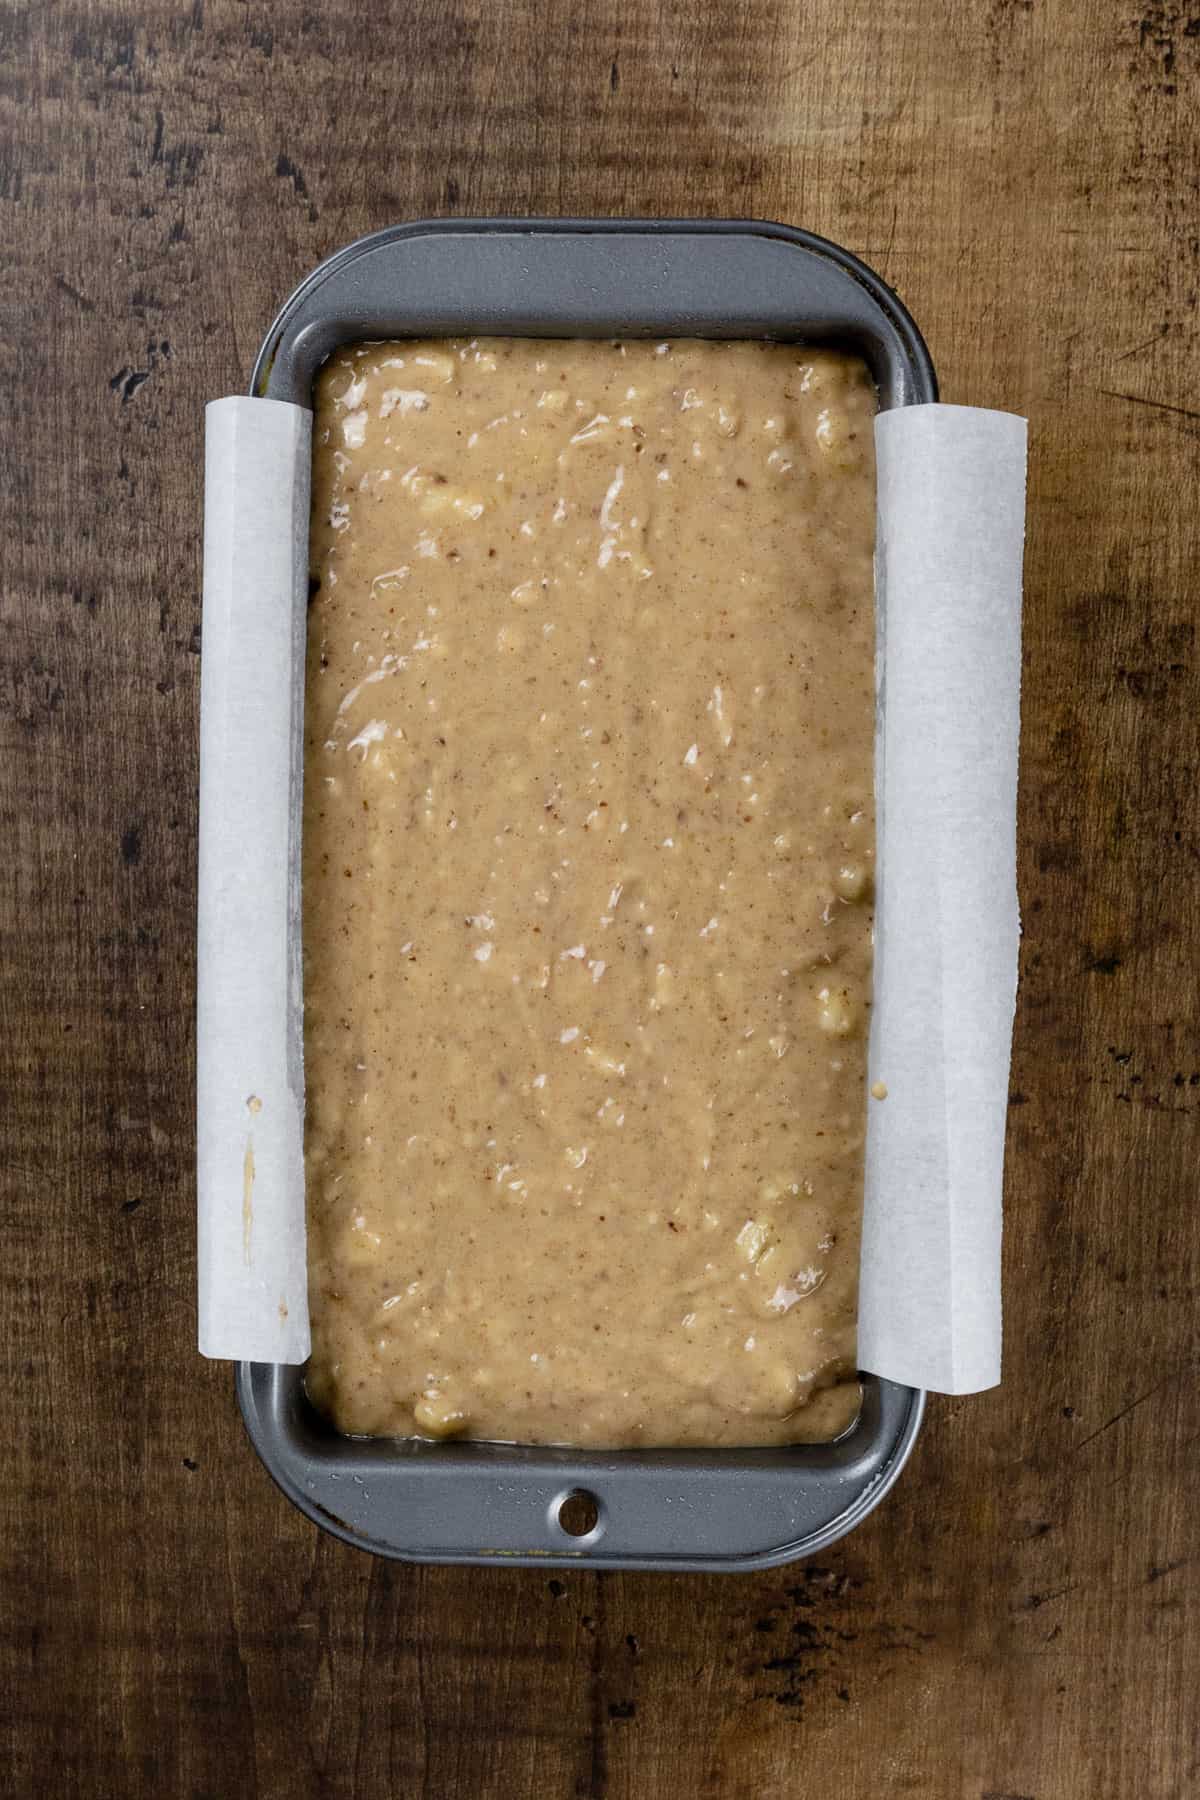 Banana bread batter is unbaked in a metal pan on a wood kitchen table.